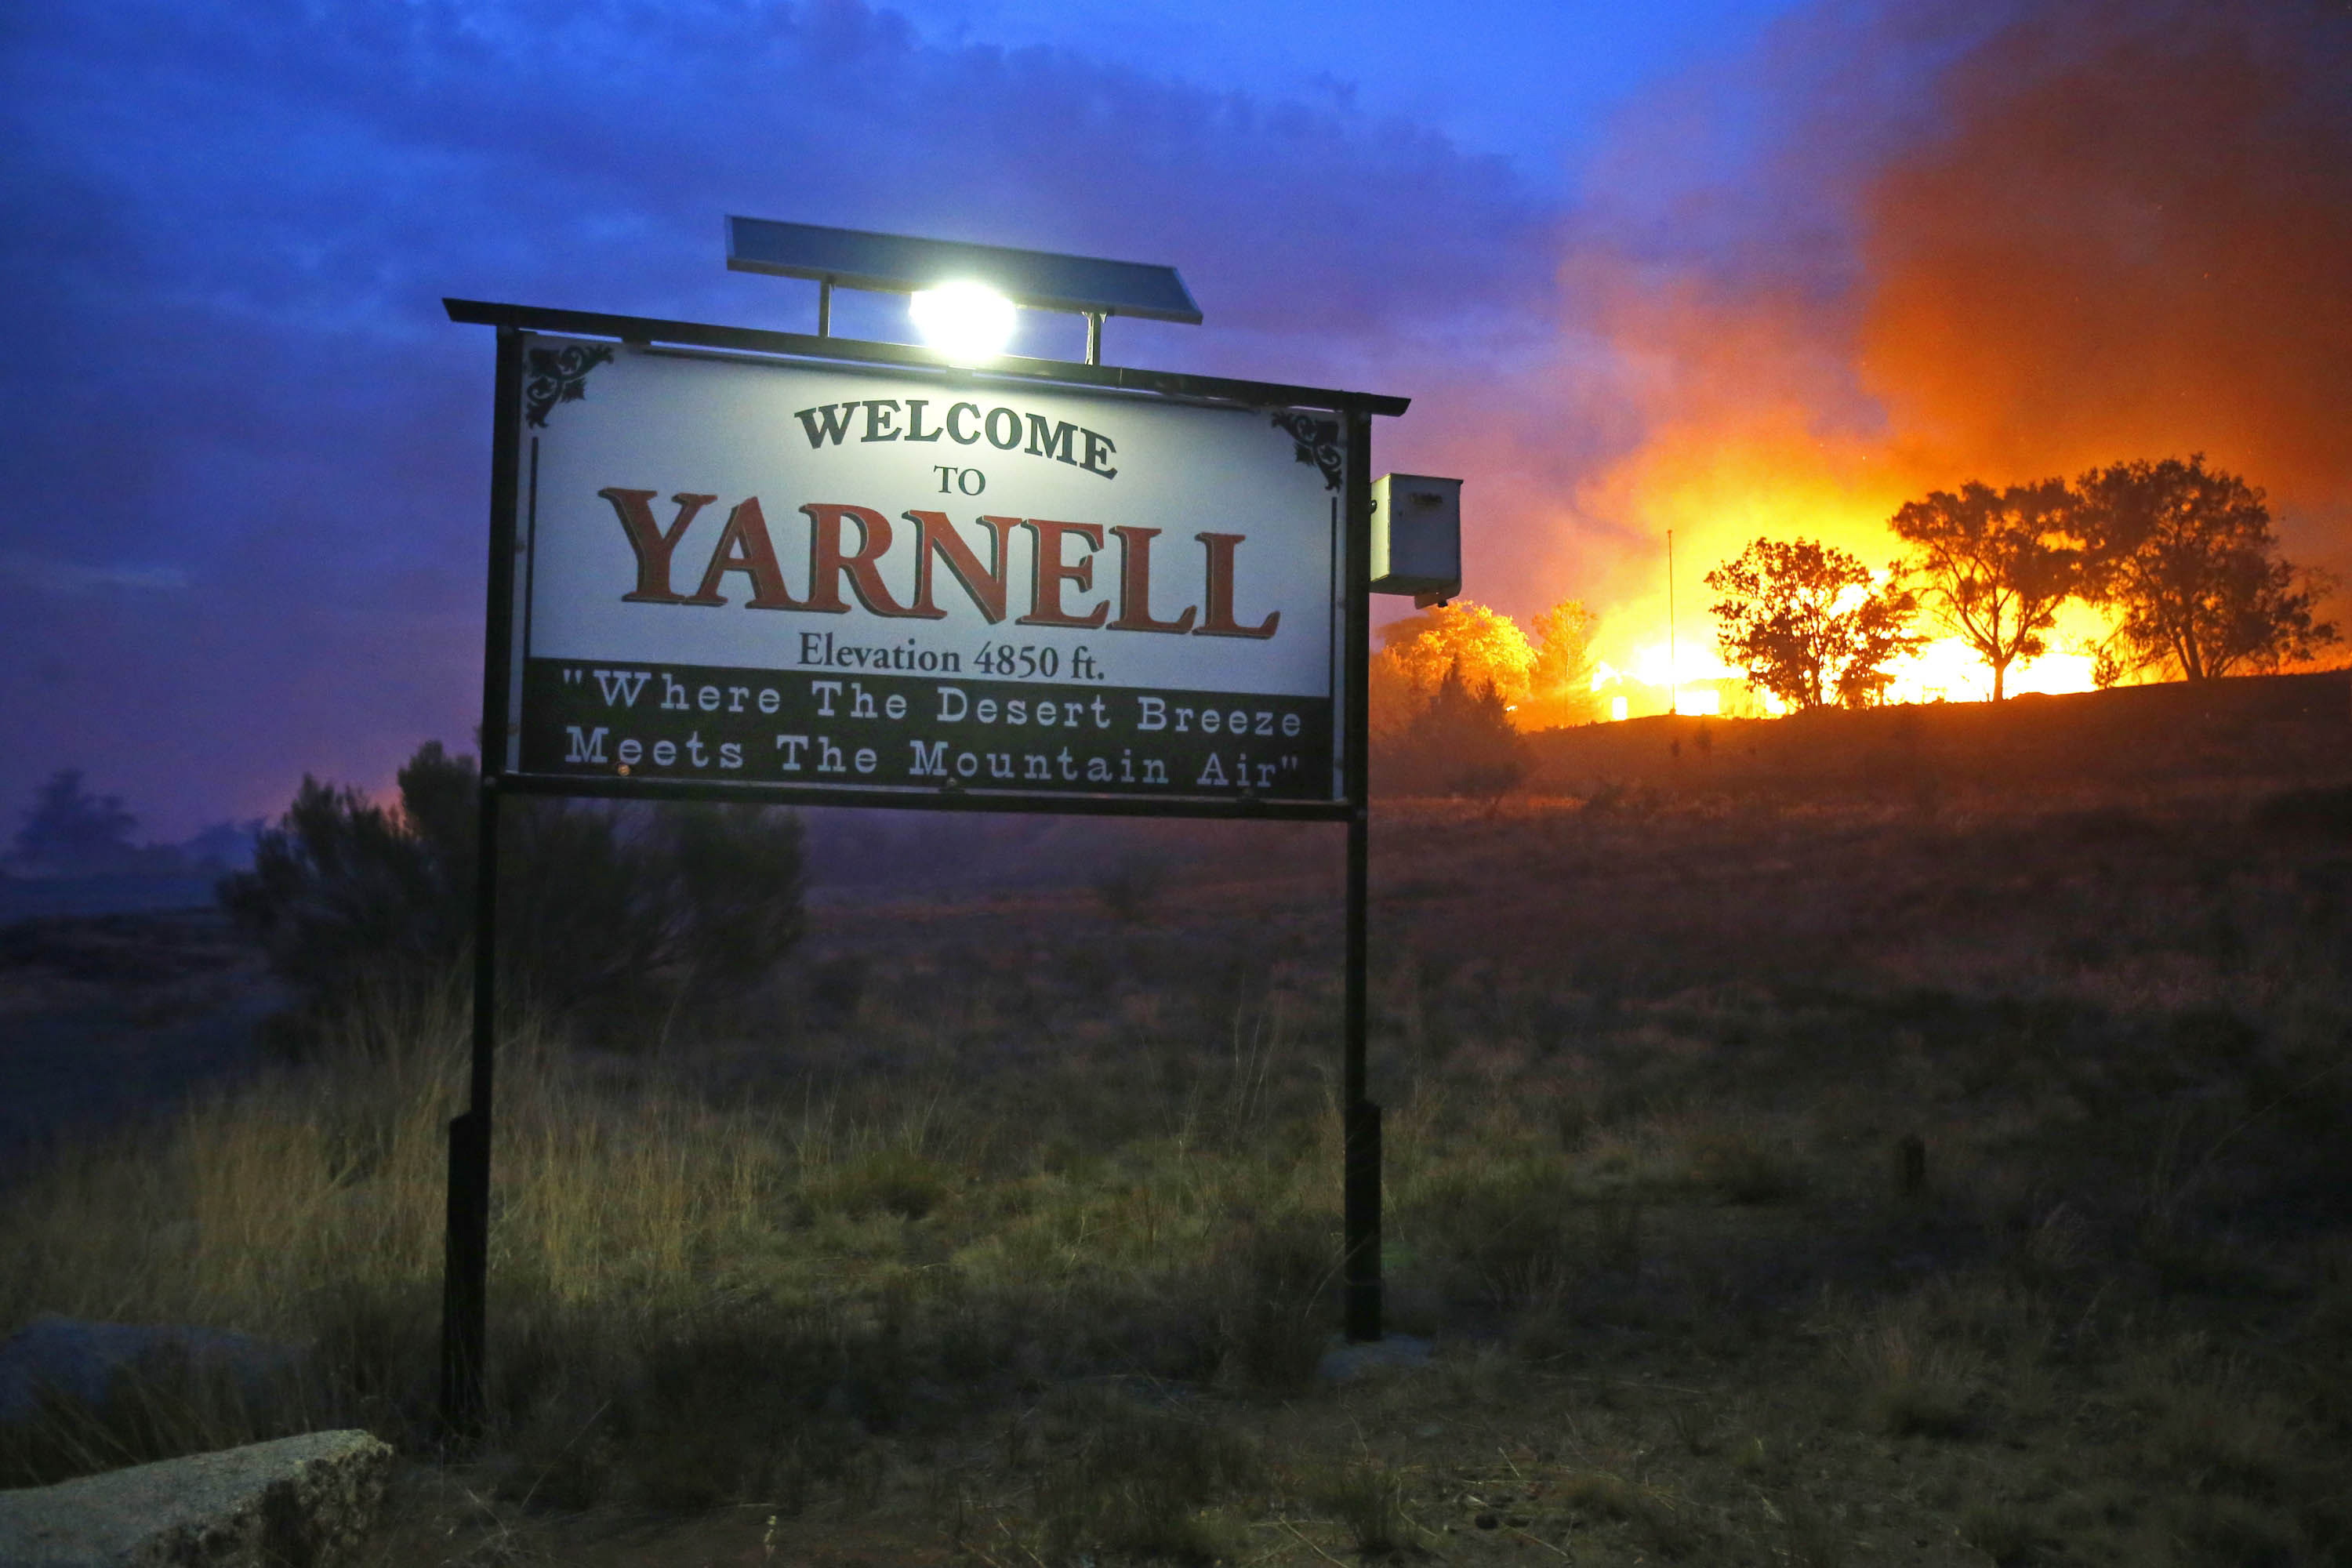 The deadly wildfire burns homes June 30 in Yarnell, Ariz.